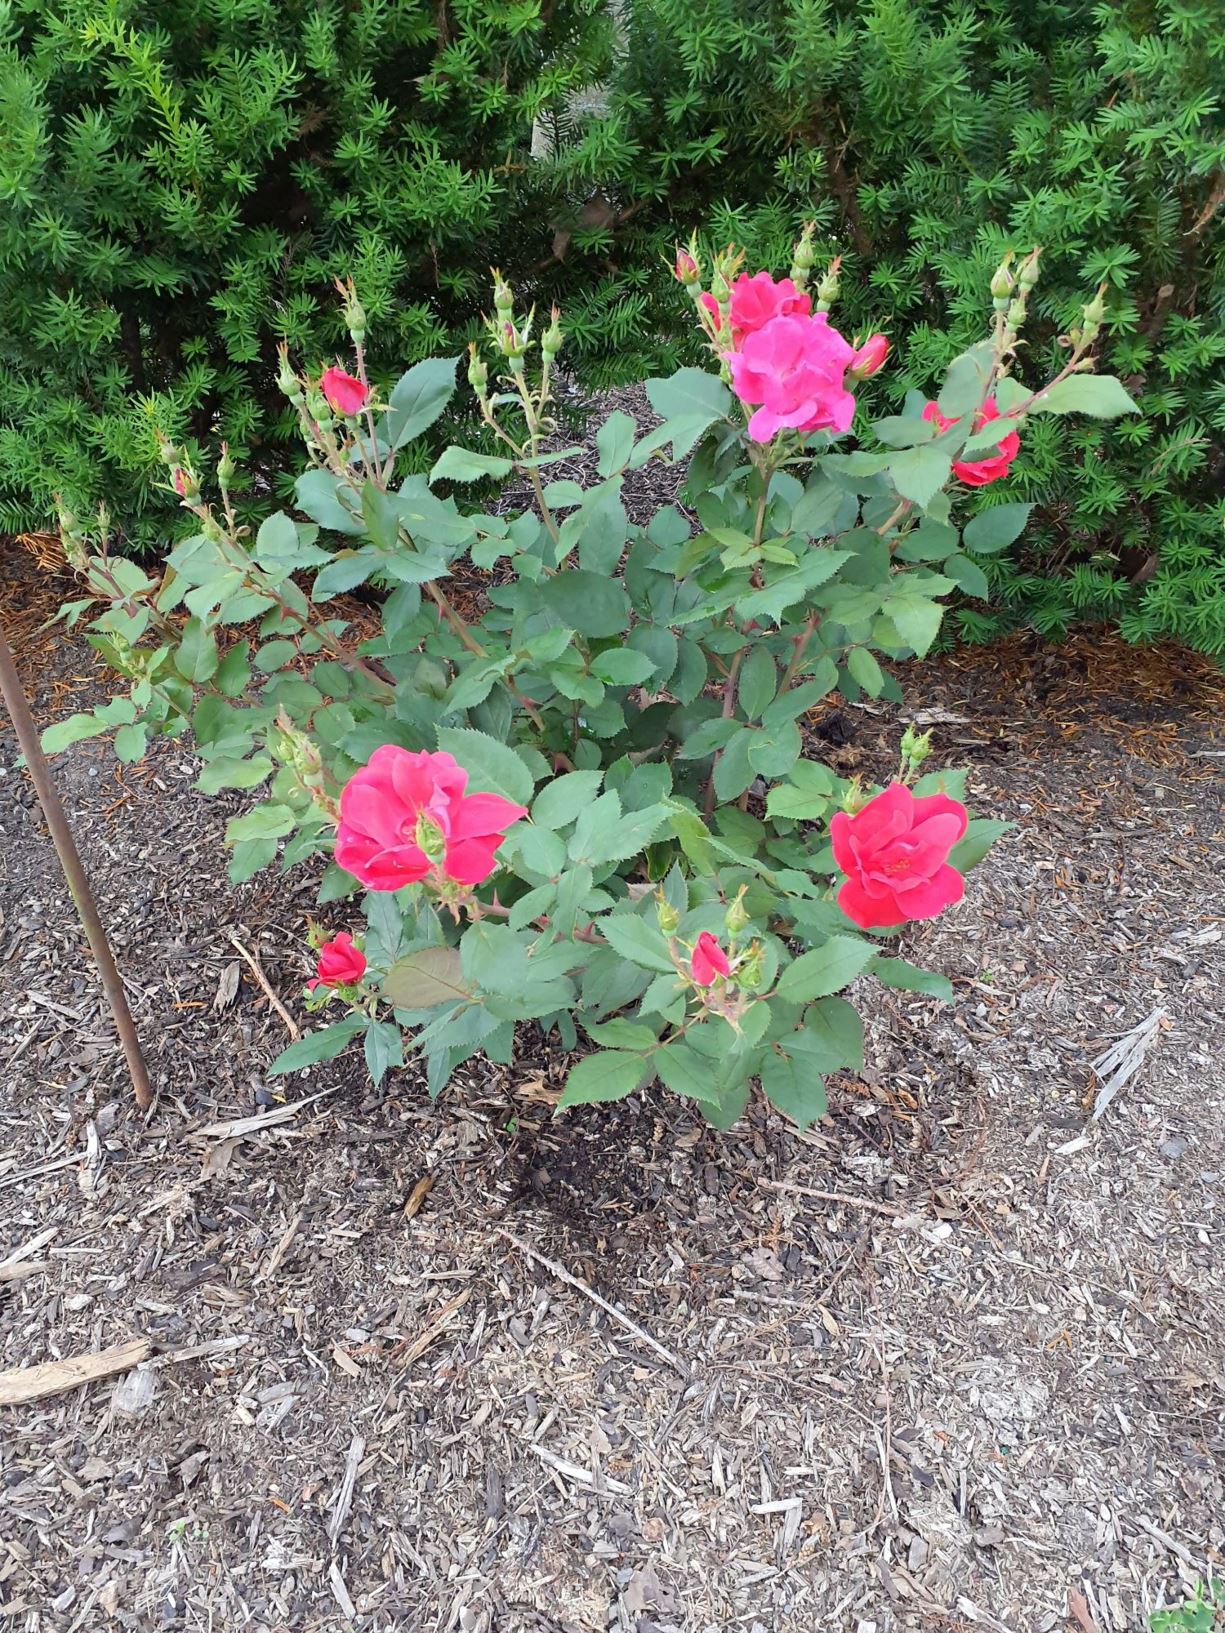 Rosa 'Radrazz' The Knock Out® - The Knock Out® rose